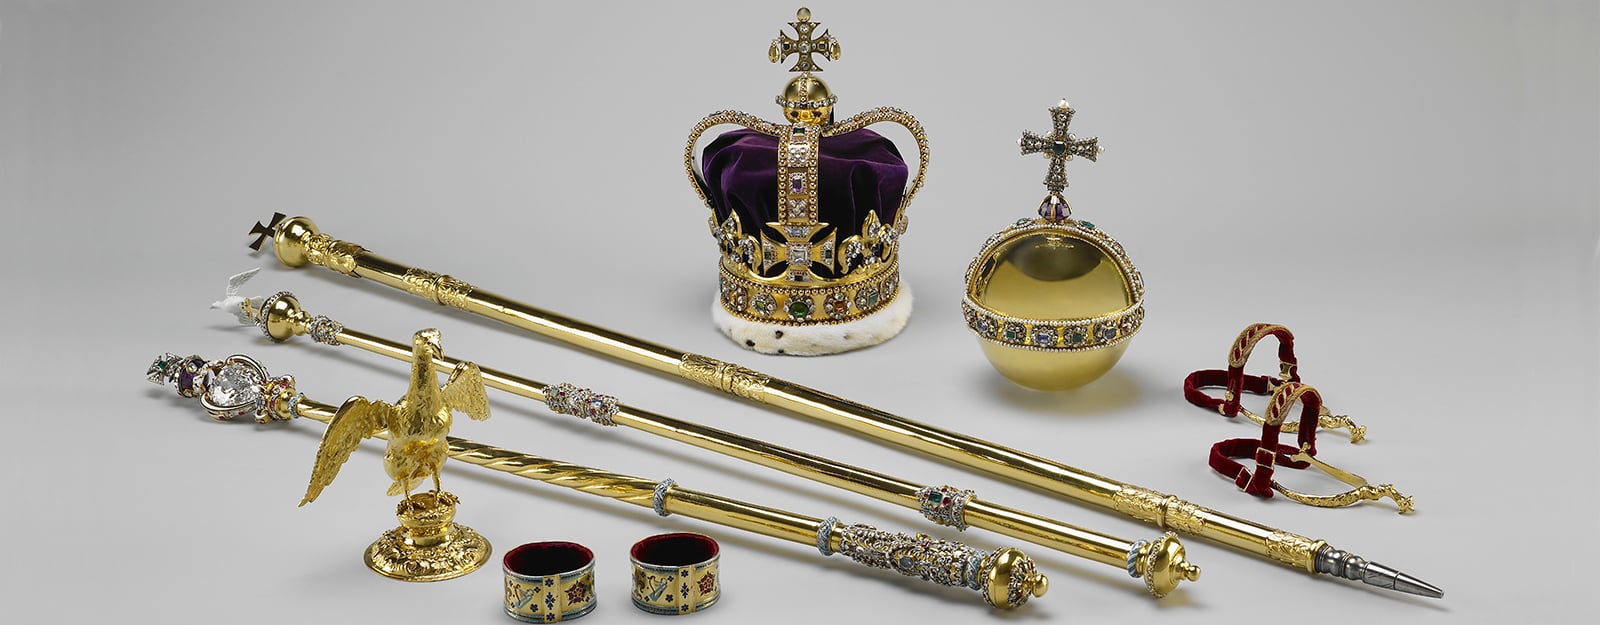 Assorted regalia from the Crown Jewels